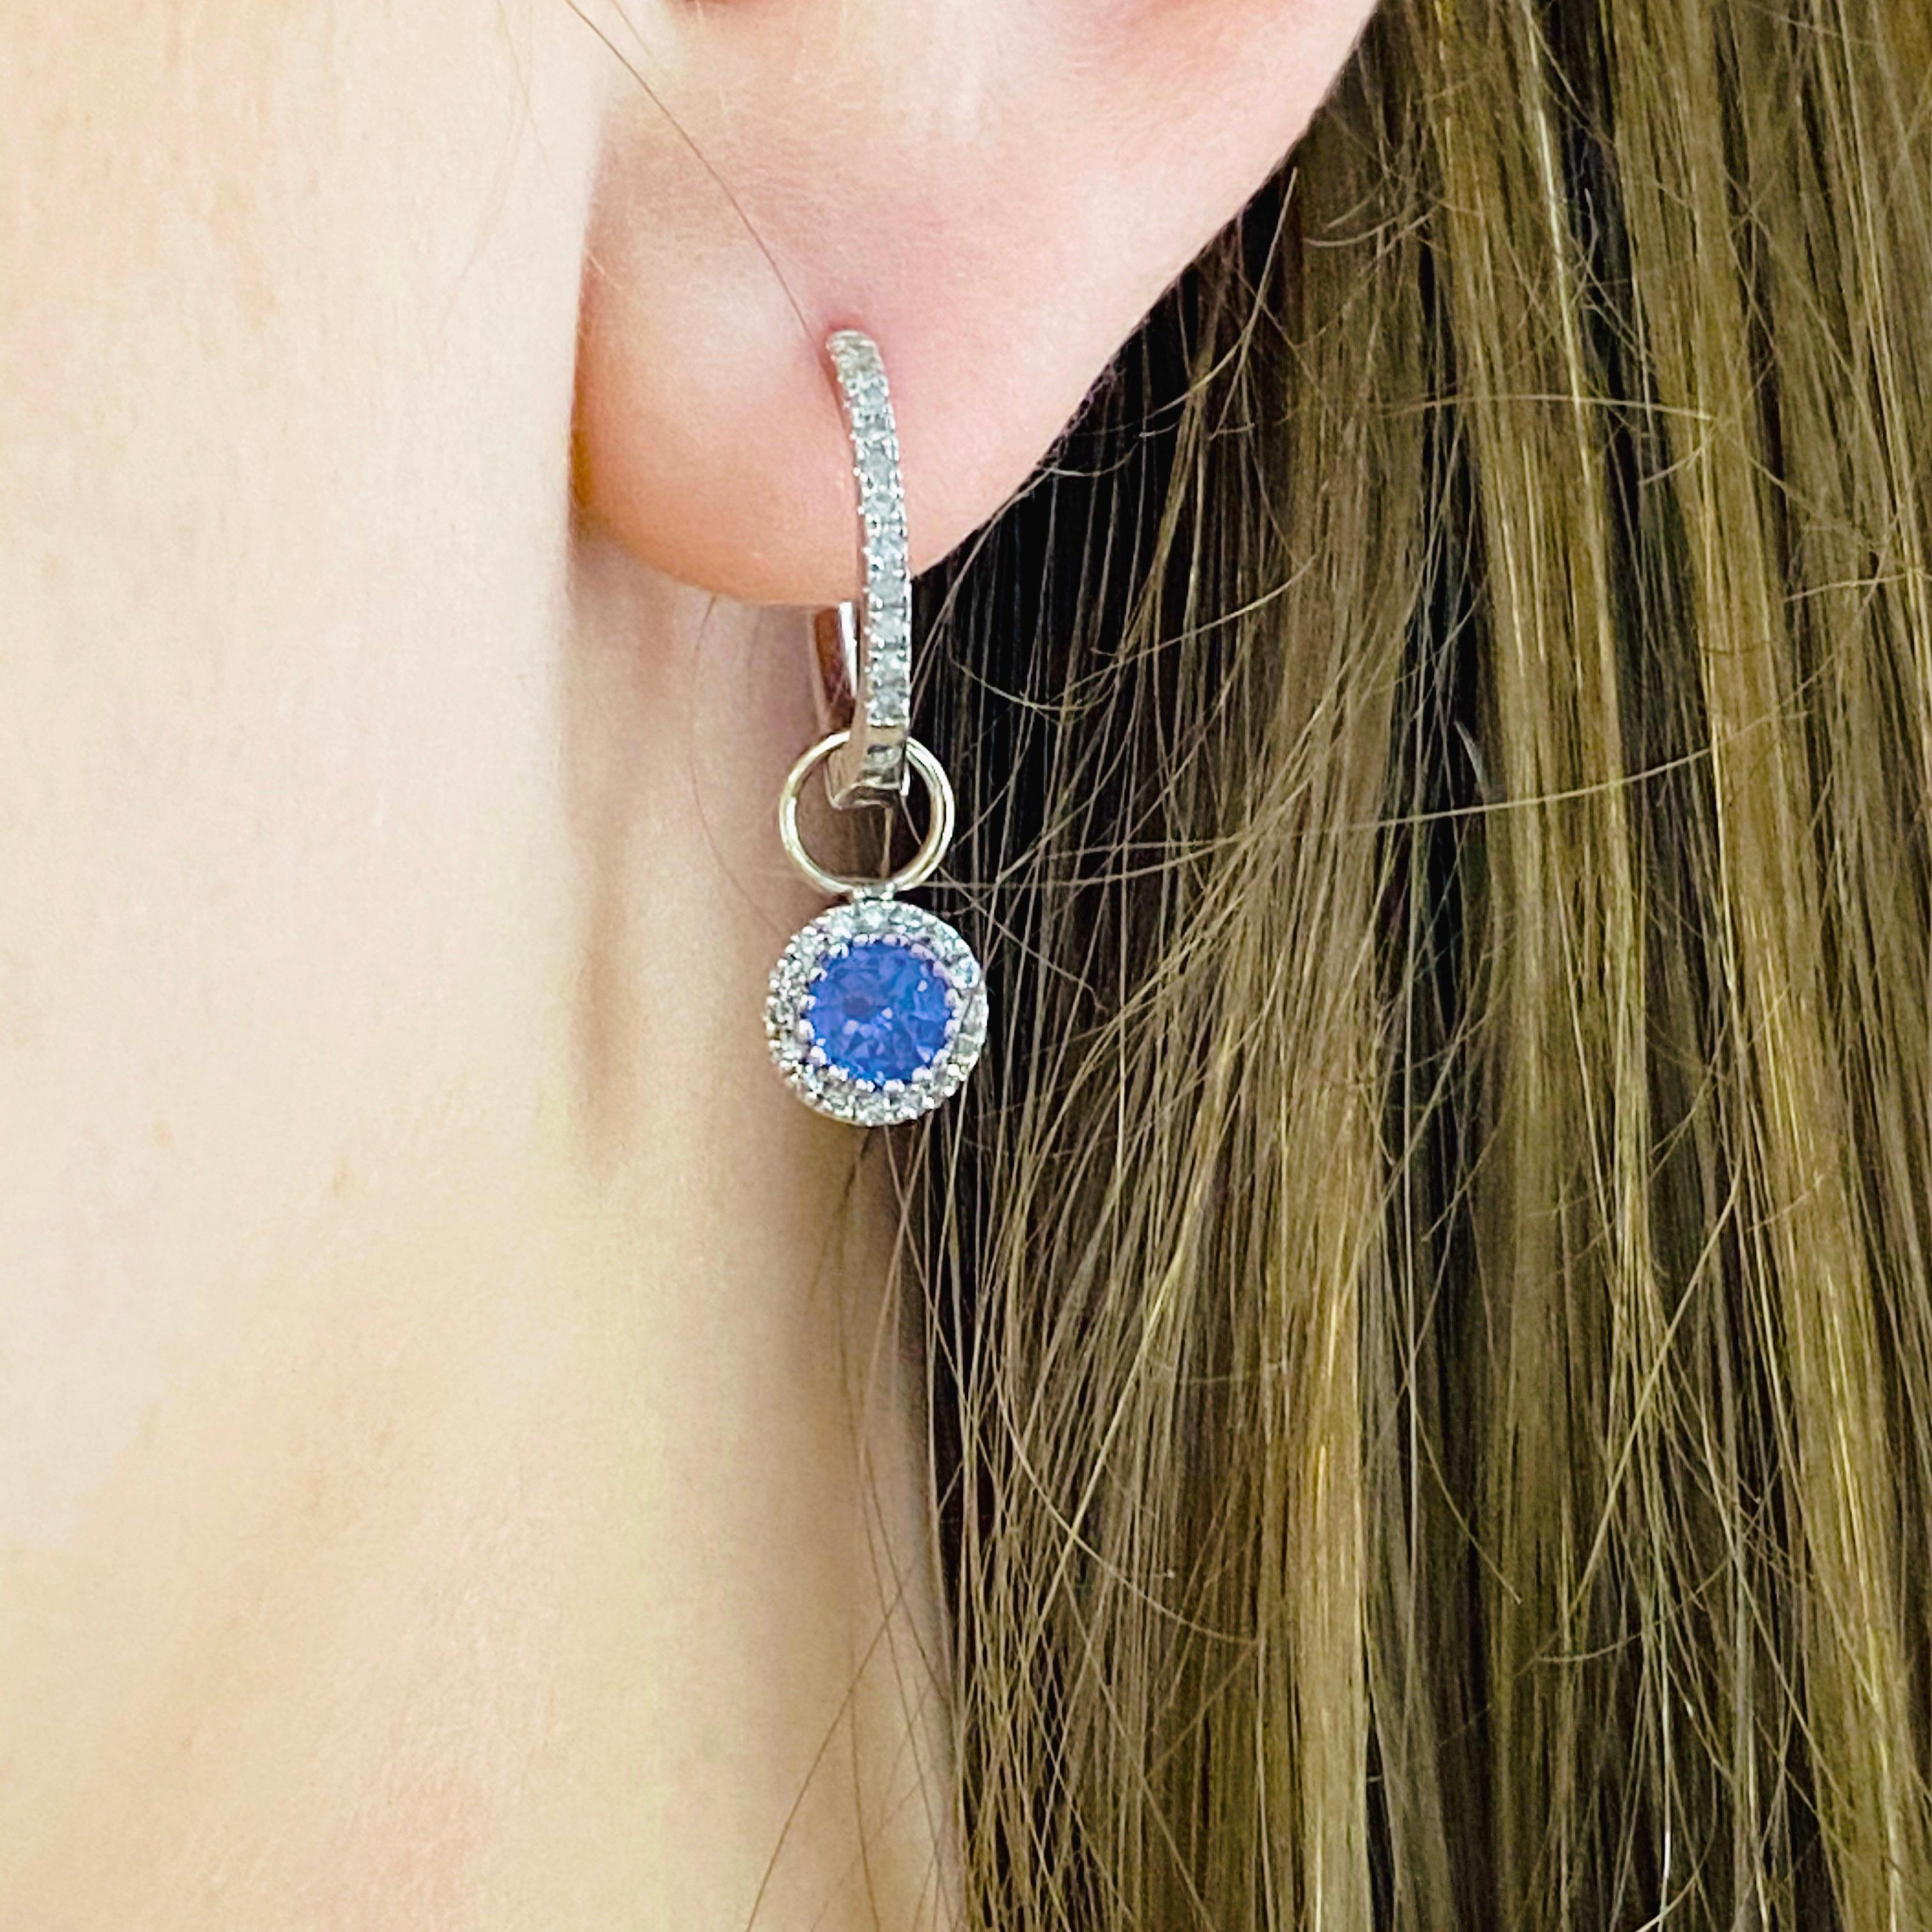 These stunning earring charms are the perfect way to dress up any pair of hoops! With polished 14k white gold surrounding a brilliant round tanzanite and dripping with white diamonds, these charms make the perfect chic and modern accessory for any